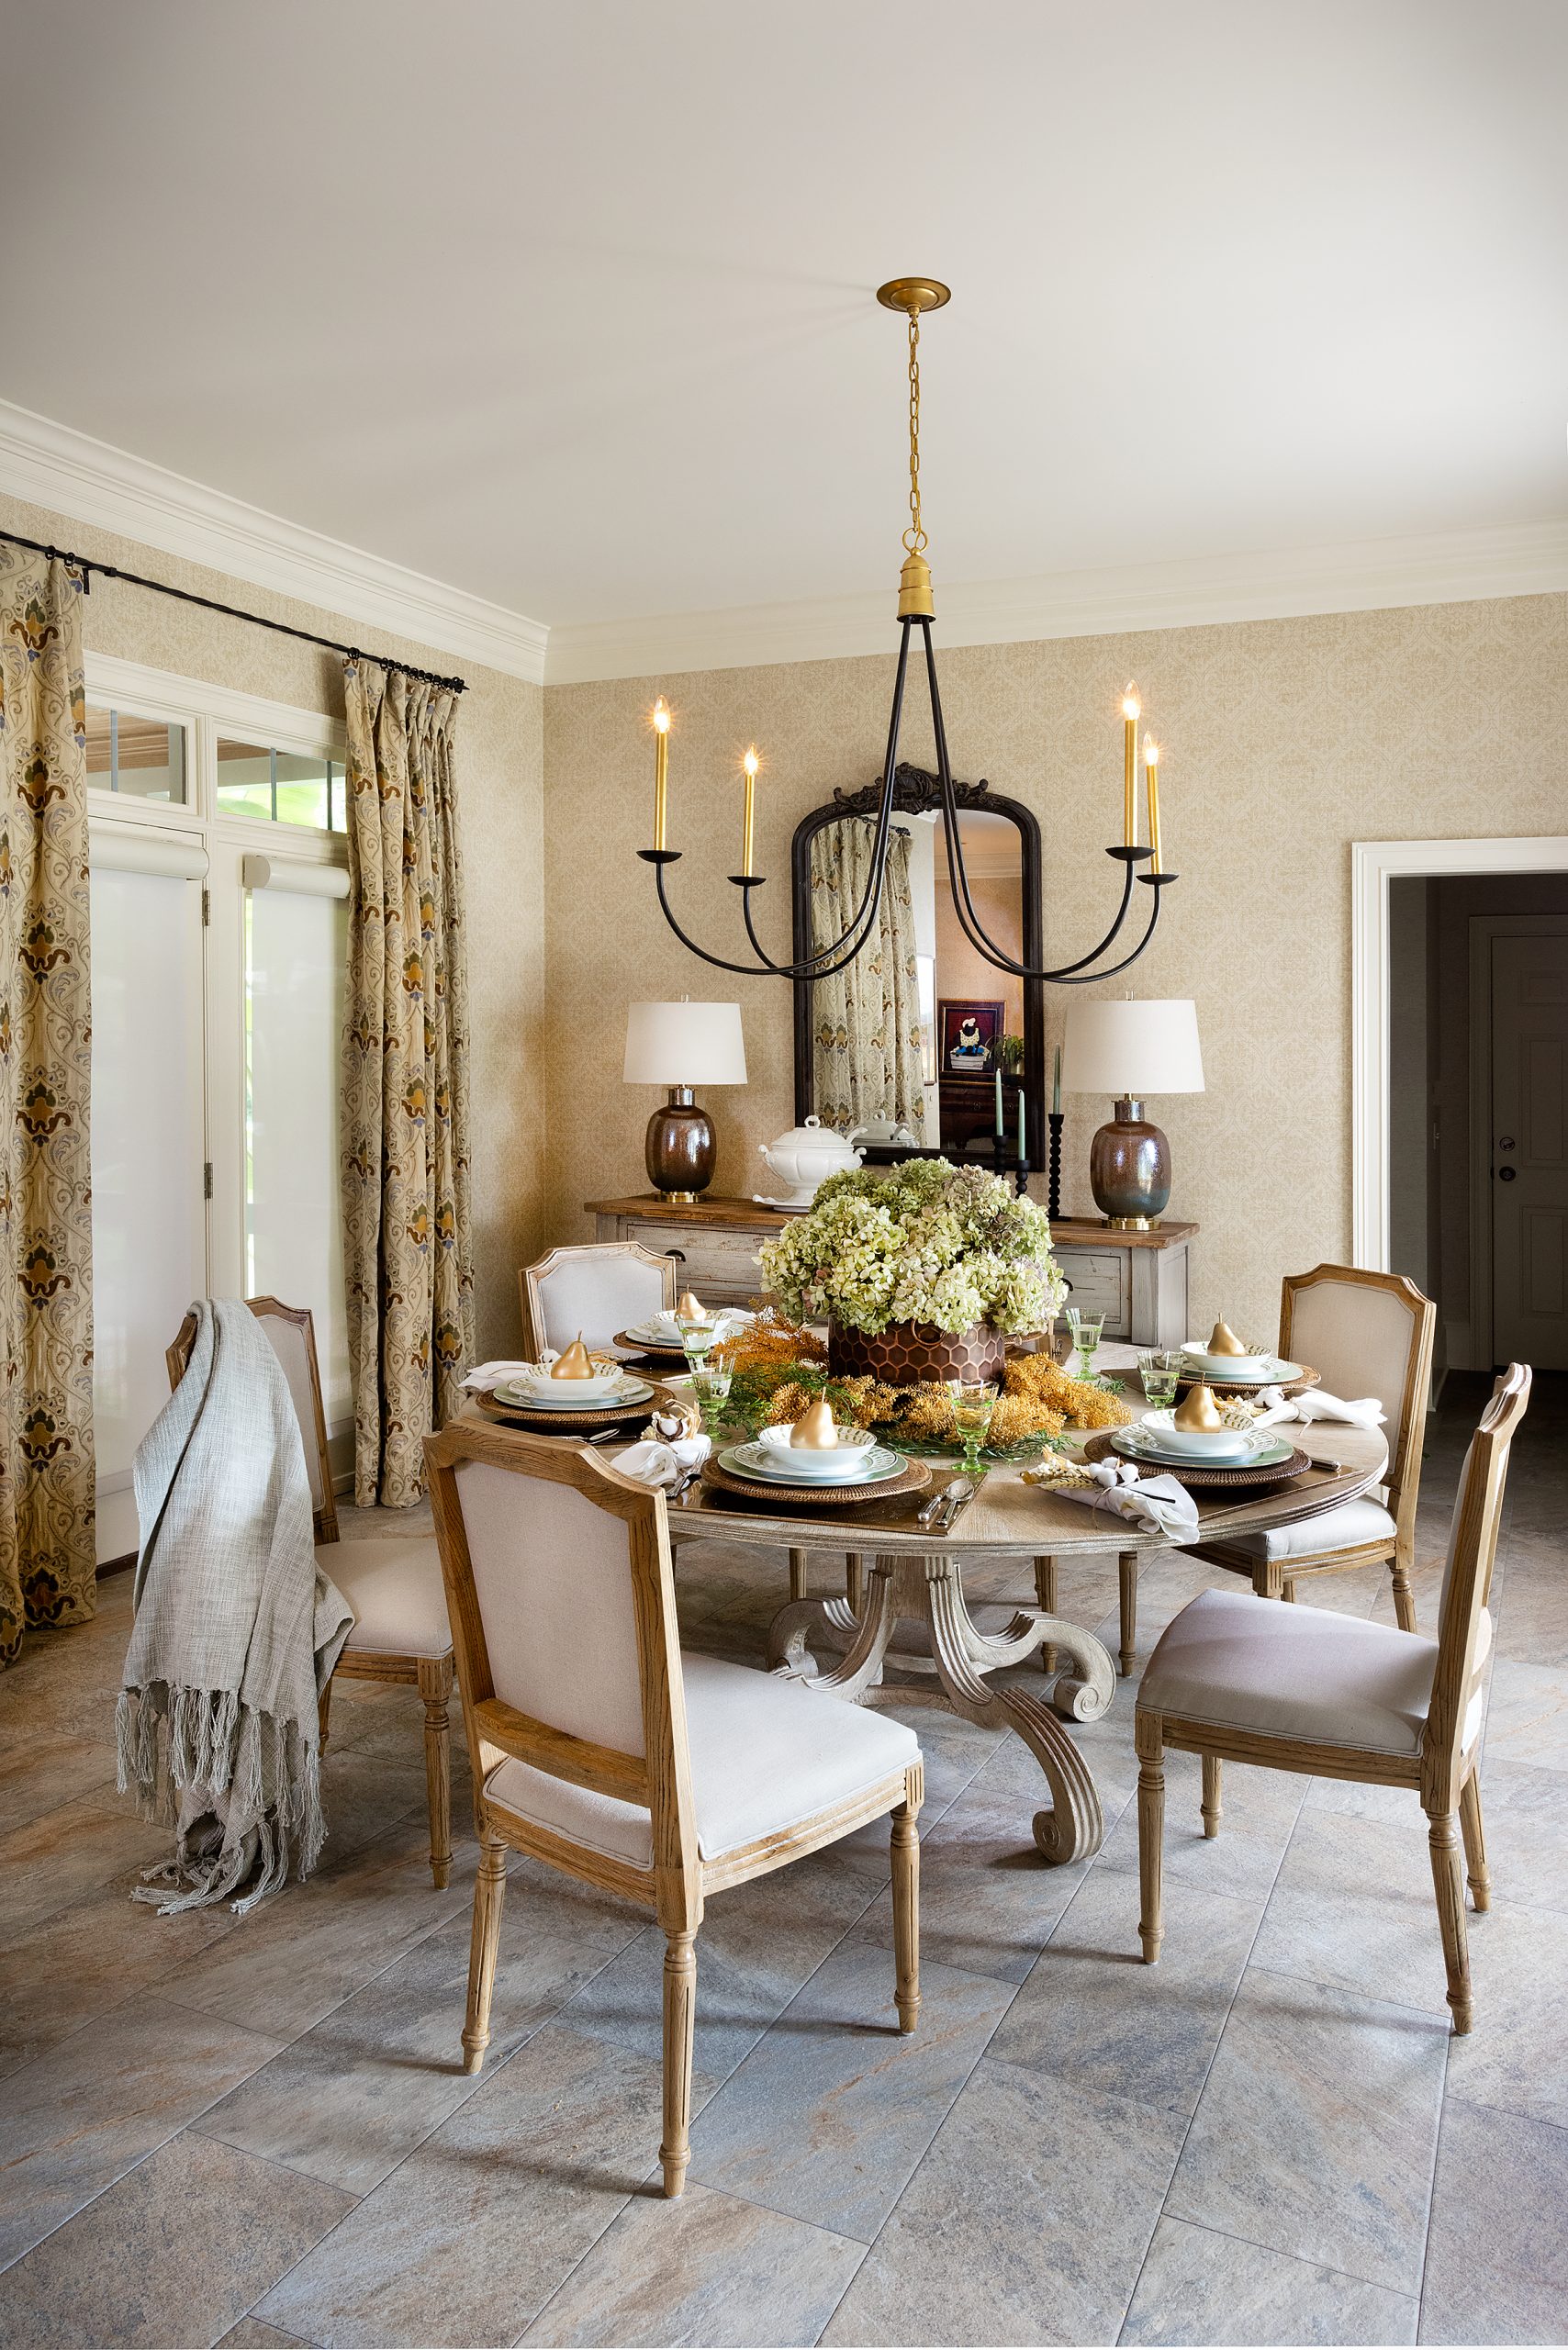 Thanksgiving at the Watsons’ home is a tradition for their family from across the country. Cathy grew up with four siblings and Cal with five, and the new breakfast room table arrangement allows for the maximum number of family members to gather comfortably.